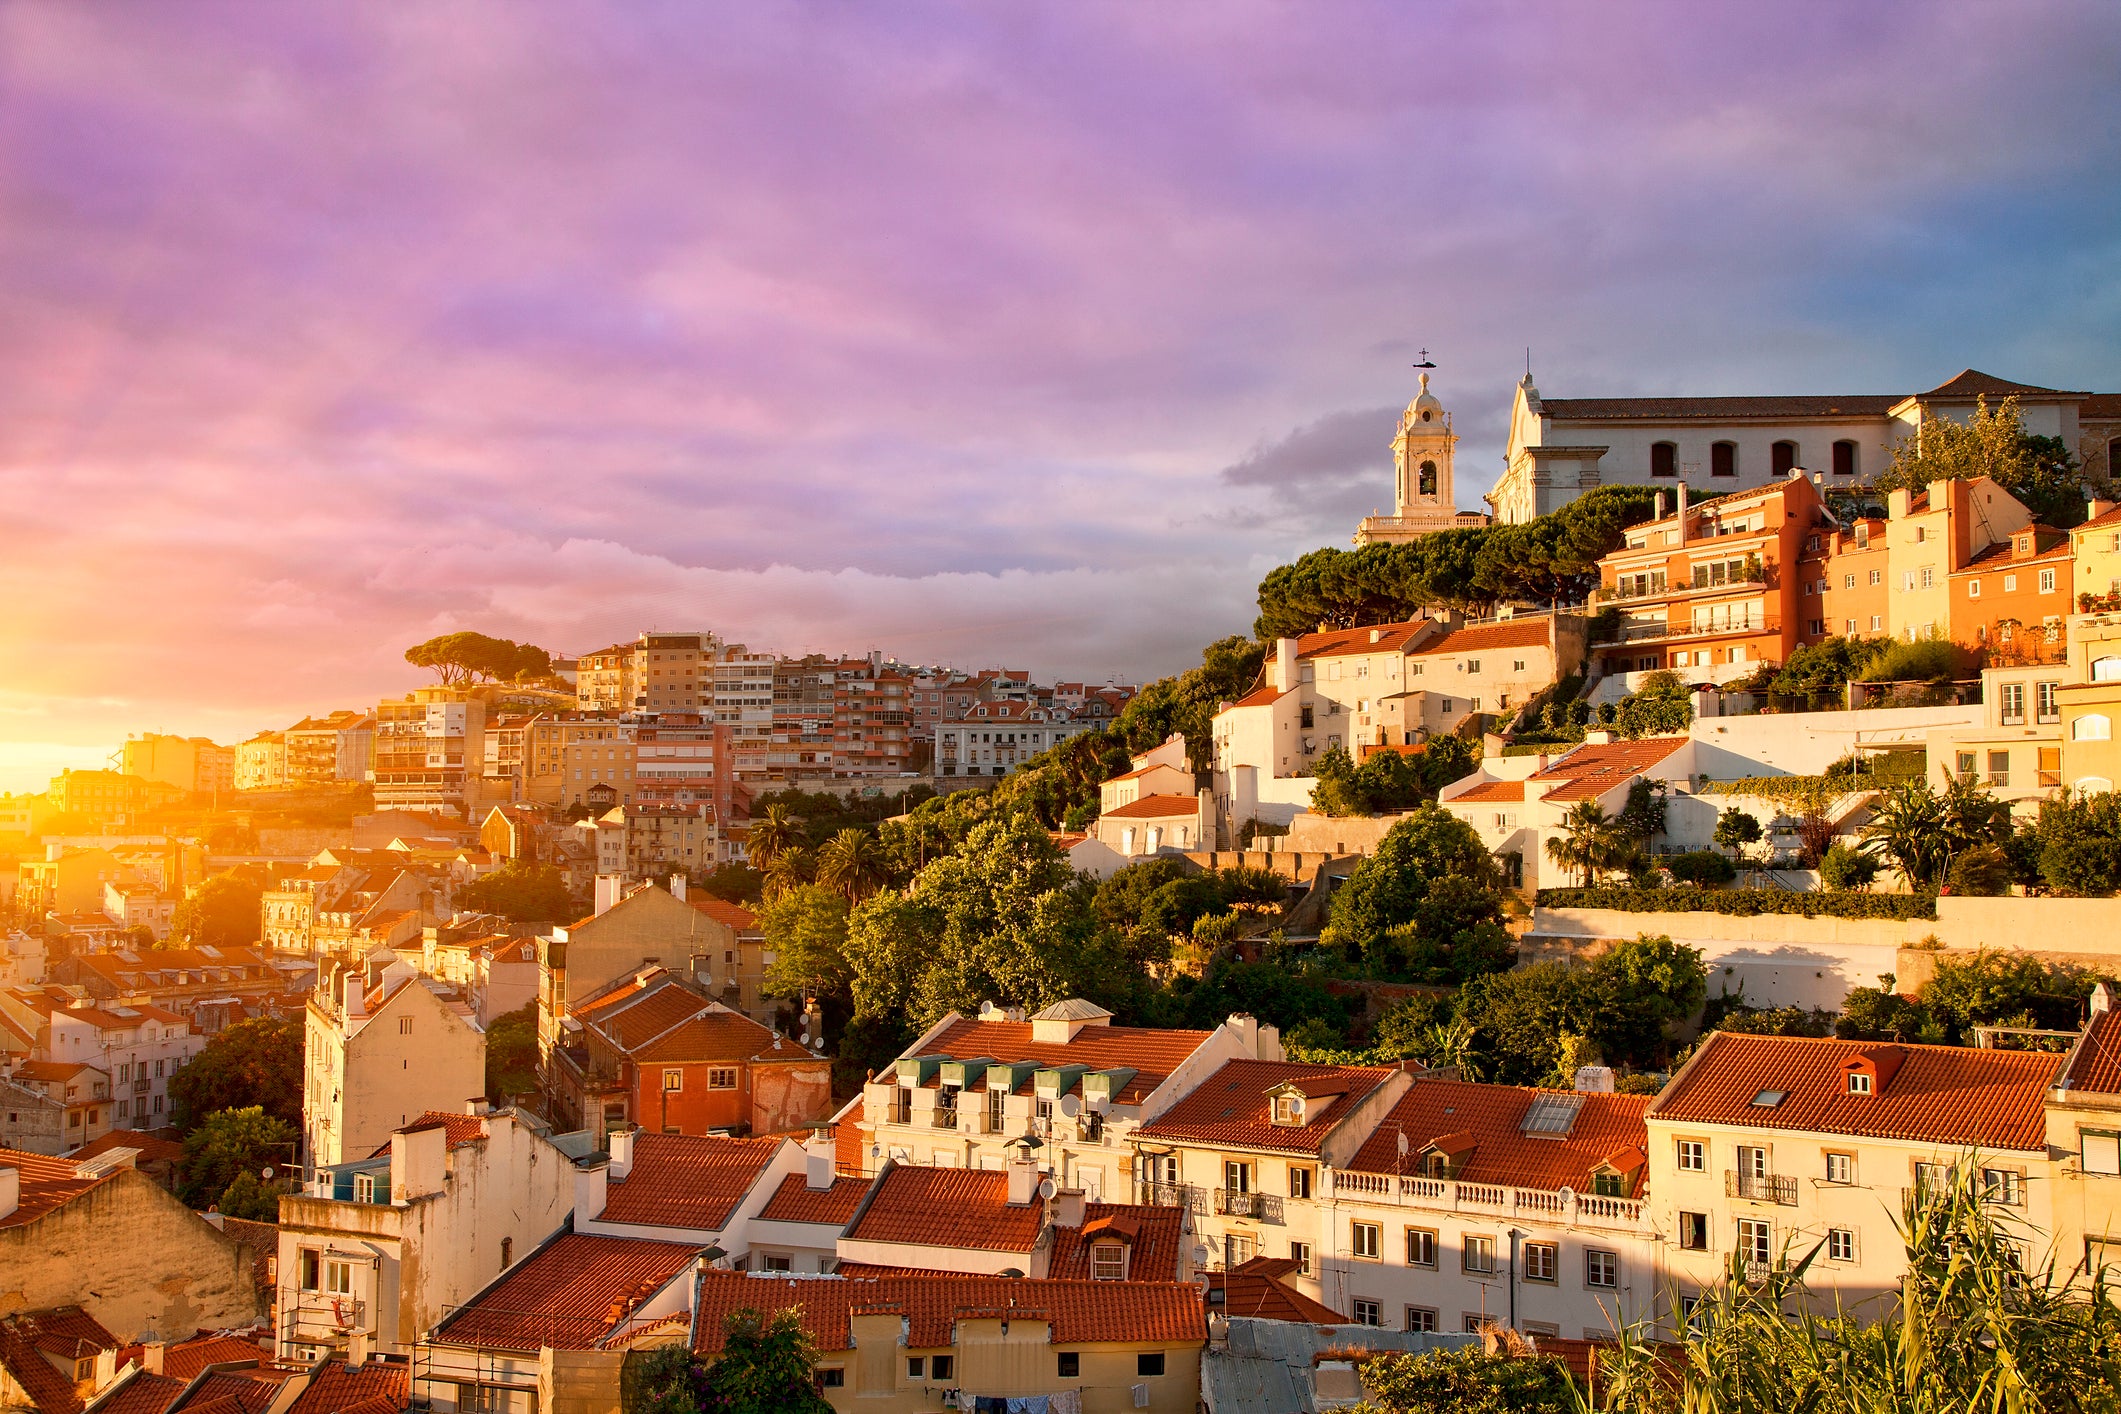 Book round-trip flights to Portugal starting at $402